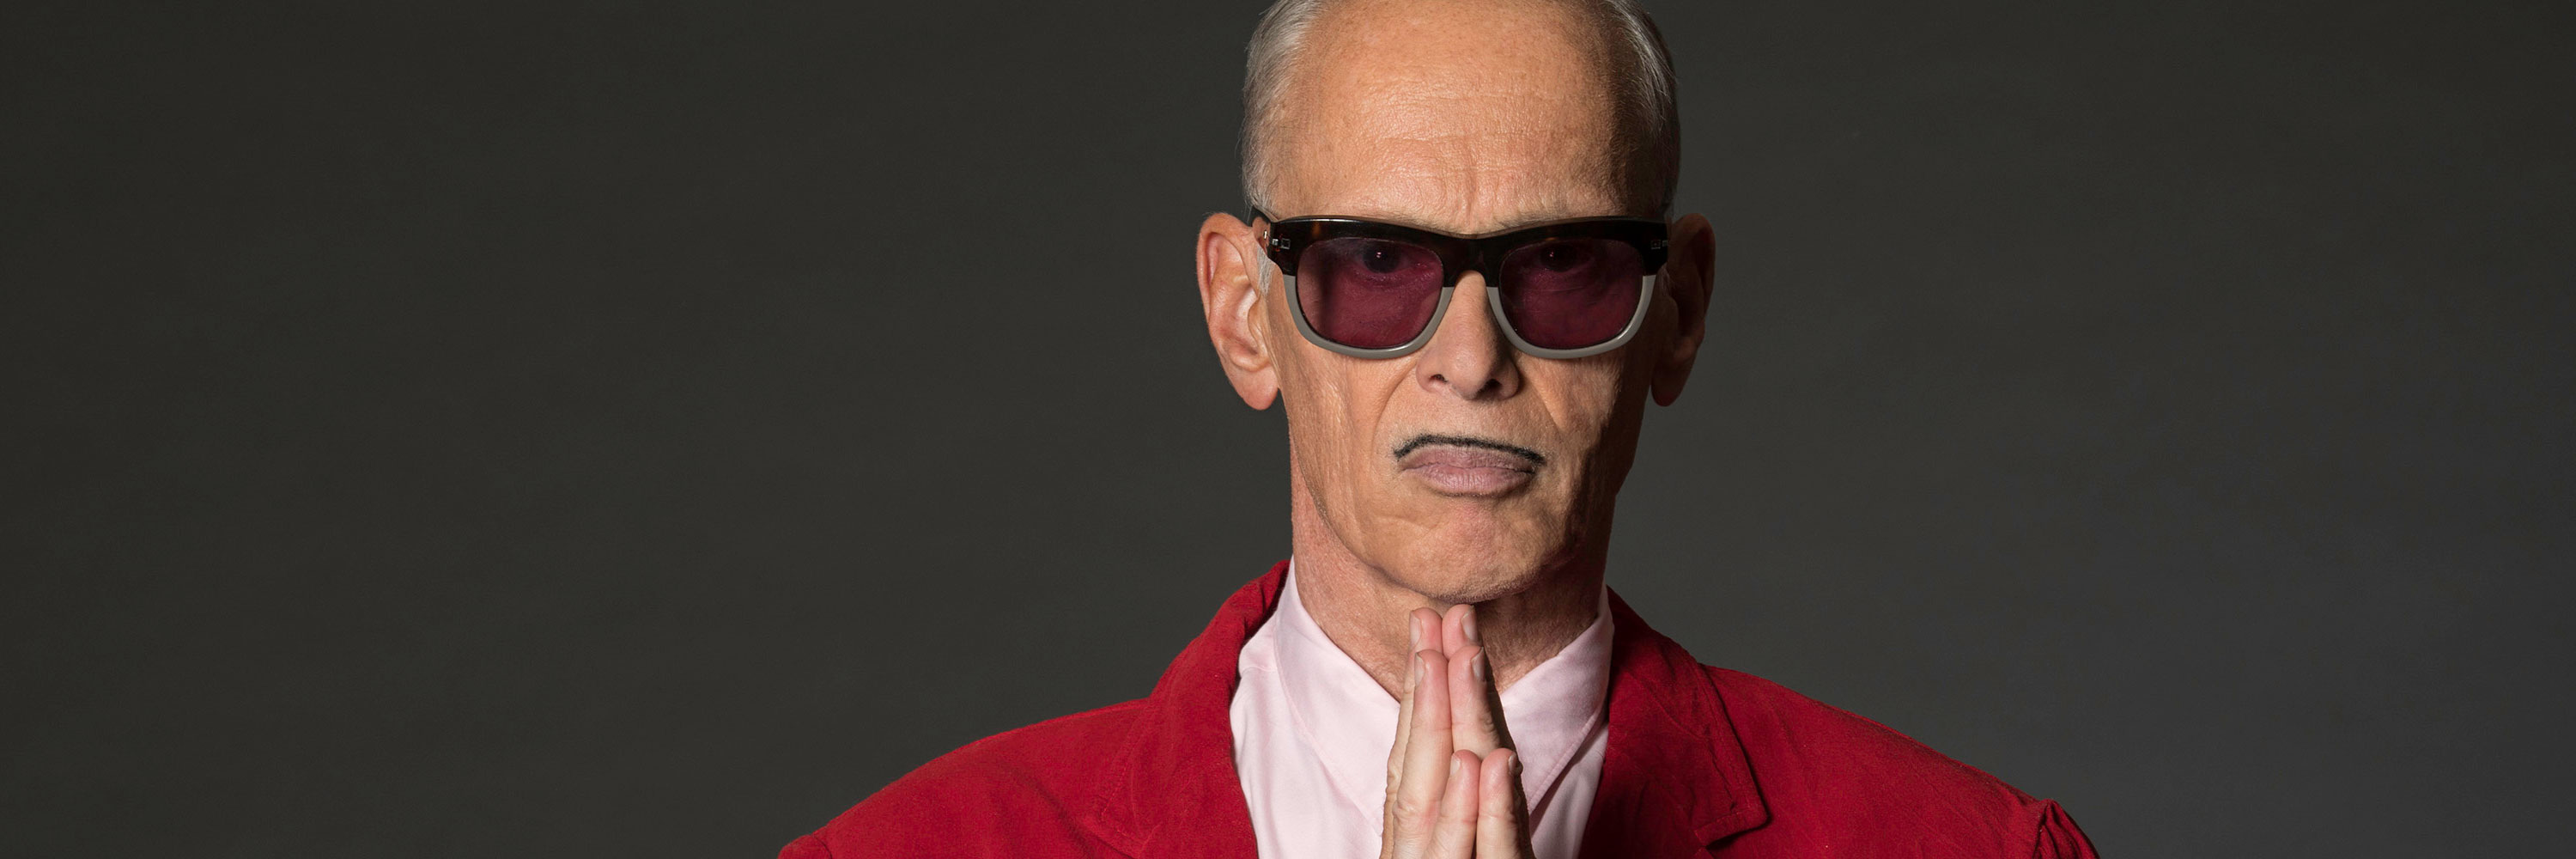 Photo of John Waters wearing a red suit and holding his hands together as if praying.